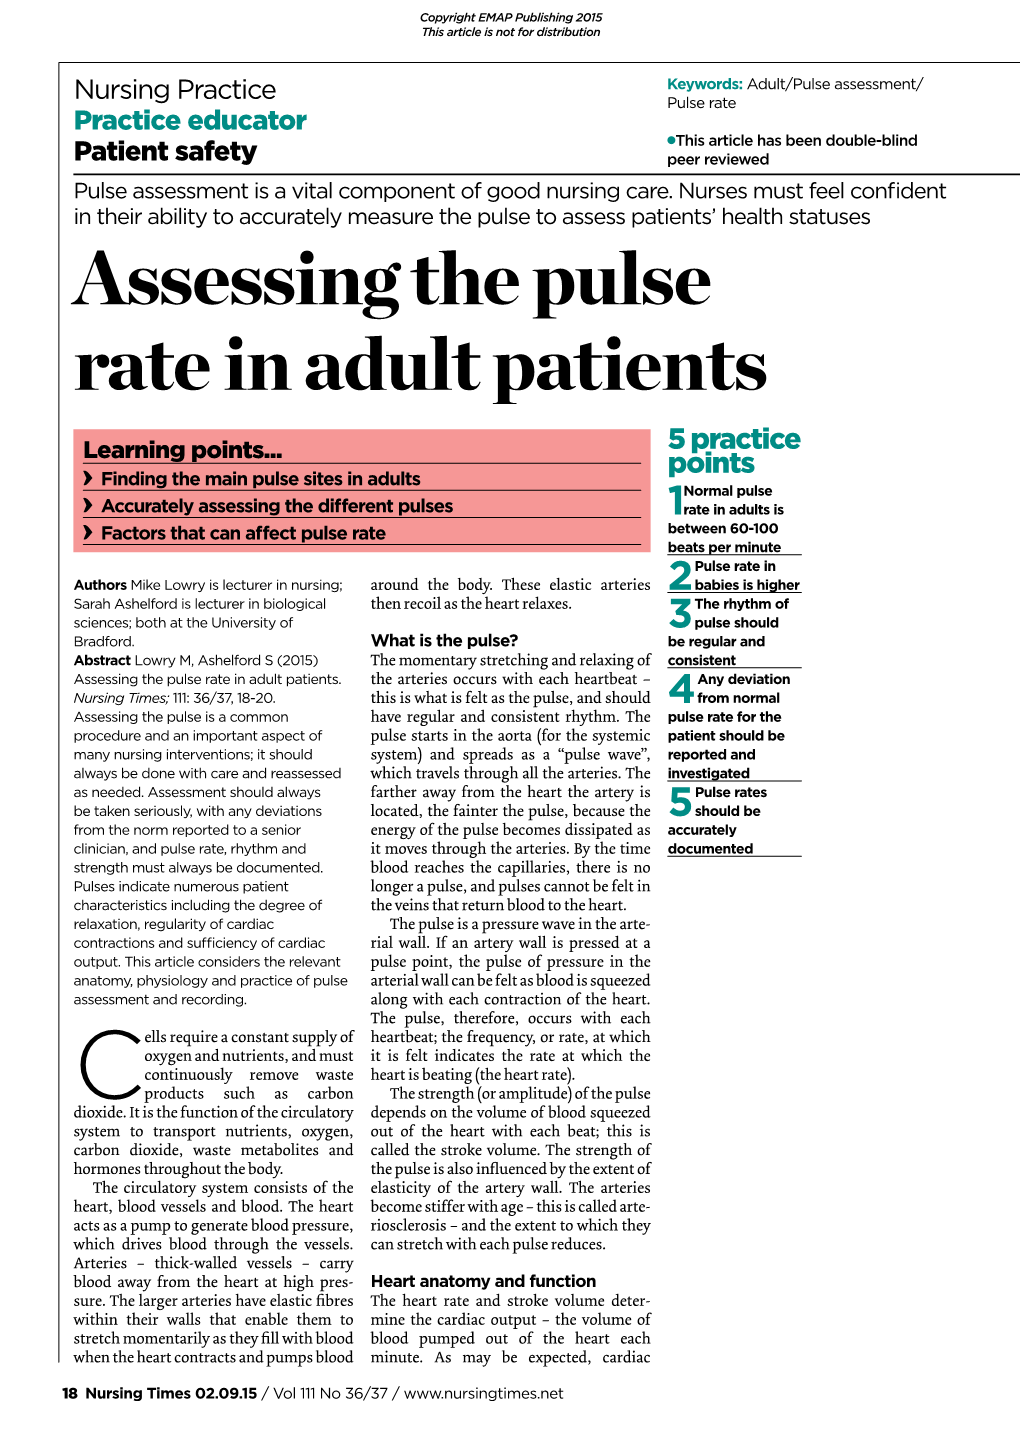 Assessing the Pulse Rate in Adult Patients